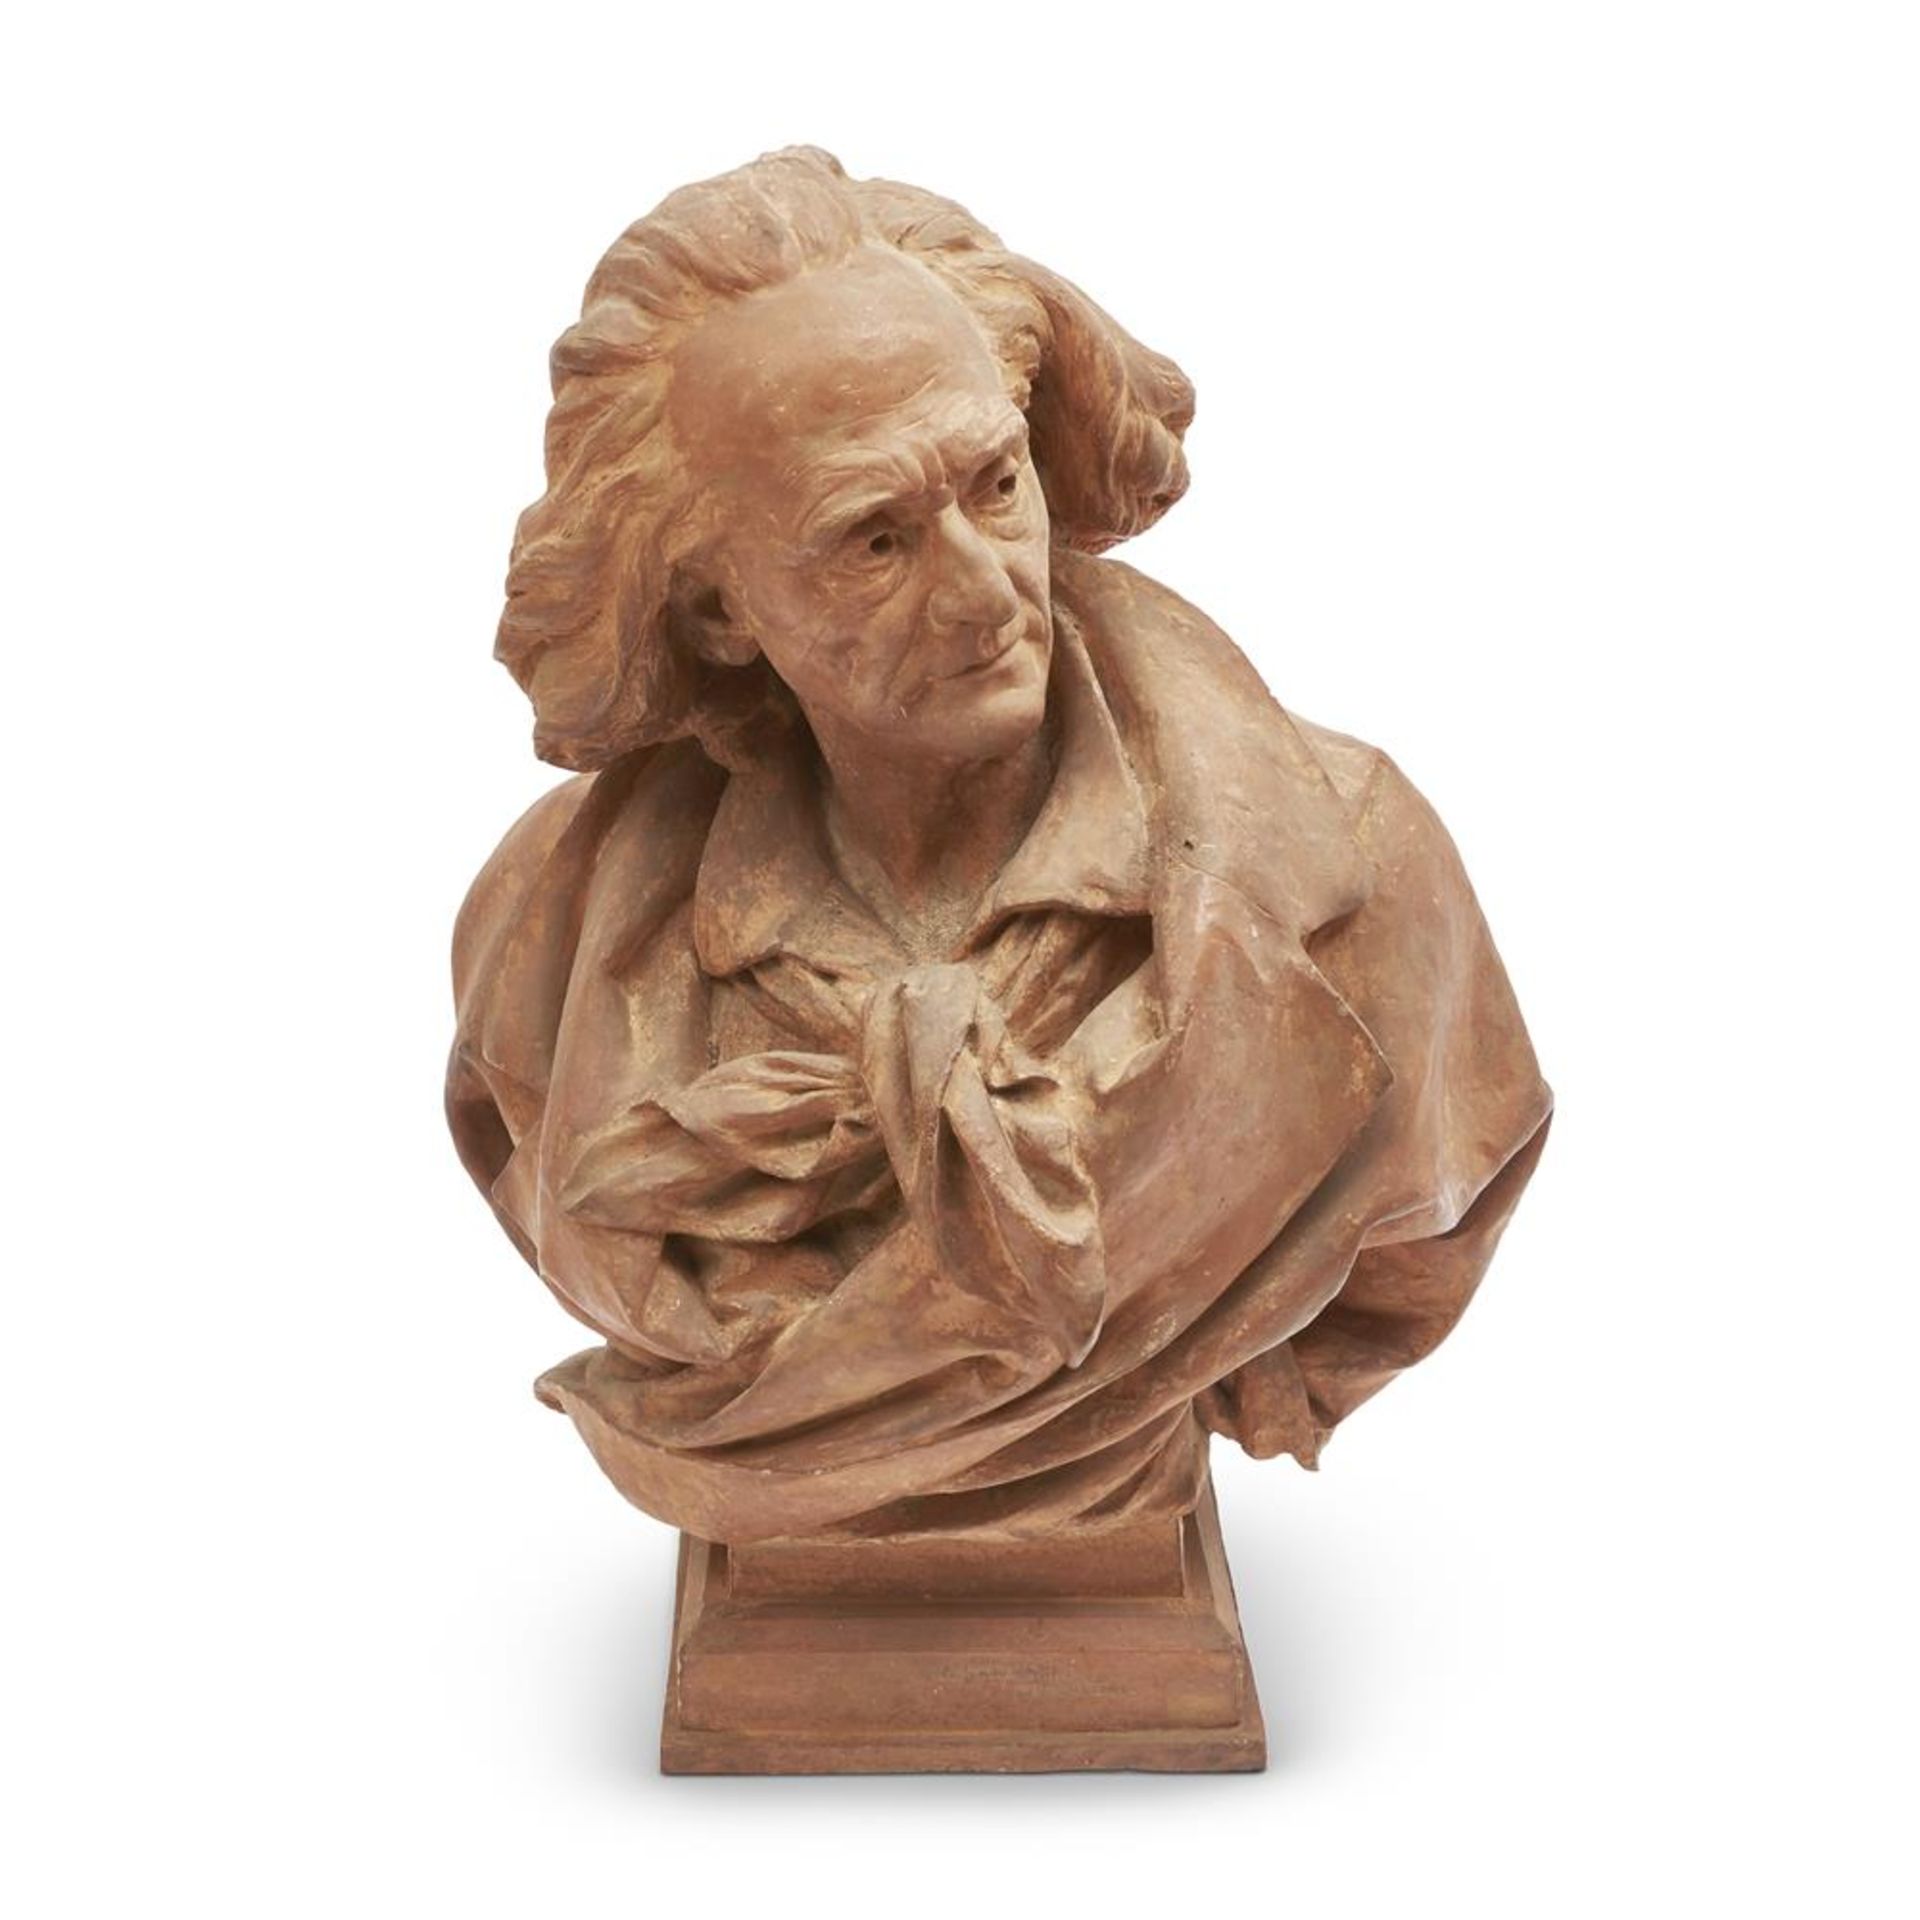 A LARGE FRENCH TERRACOTTA BUST OF FRANZ LISZT (1811-1886) MODELLED BY LUCIEN PALLEZ, CIRCA 1900